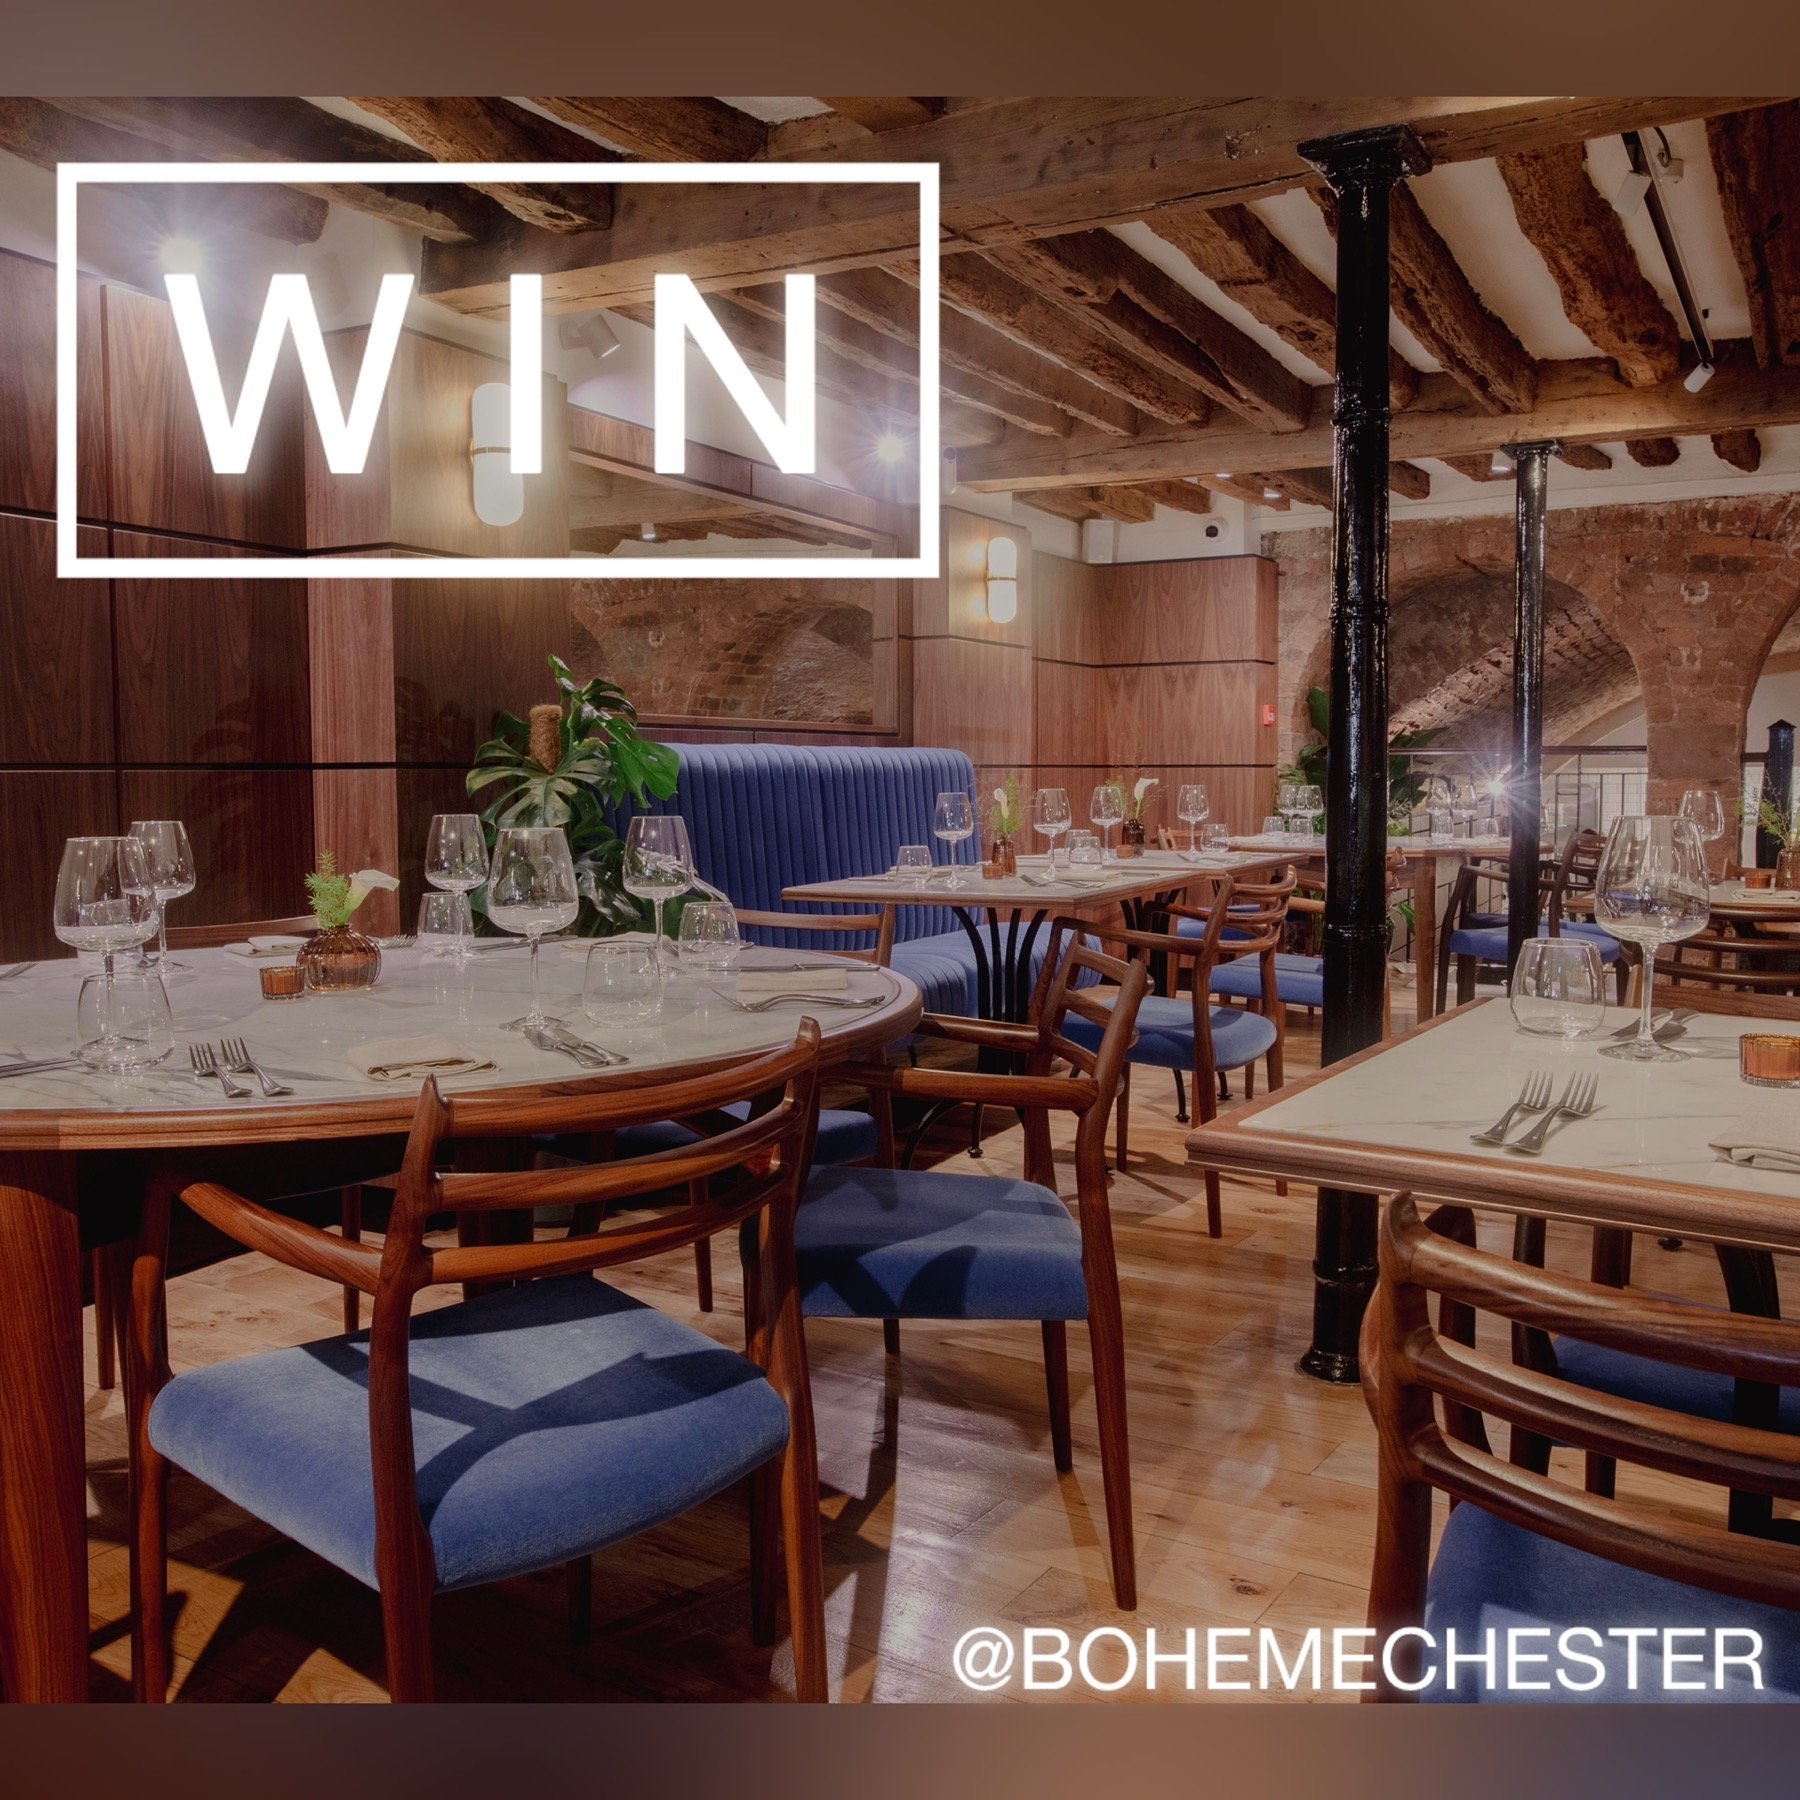 #competitiontime 🎉💛 WIN A THREE COURSE MEAL AT BOHEME FOR TWO PEOPLE WITH TWO COCKTAILS AND A BOTTLE OF WINE 💛🎉

To celebrate their upcoming new menu we&rsquo;ve teamed up with @bohemechester  to offer one lucky winner a Three course meal at Bohe